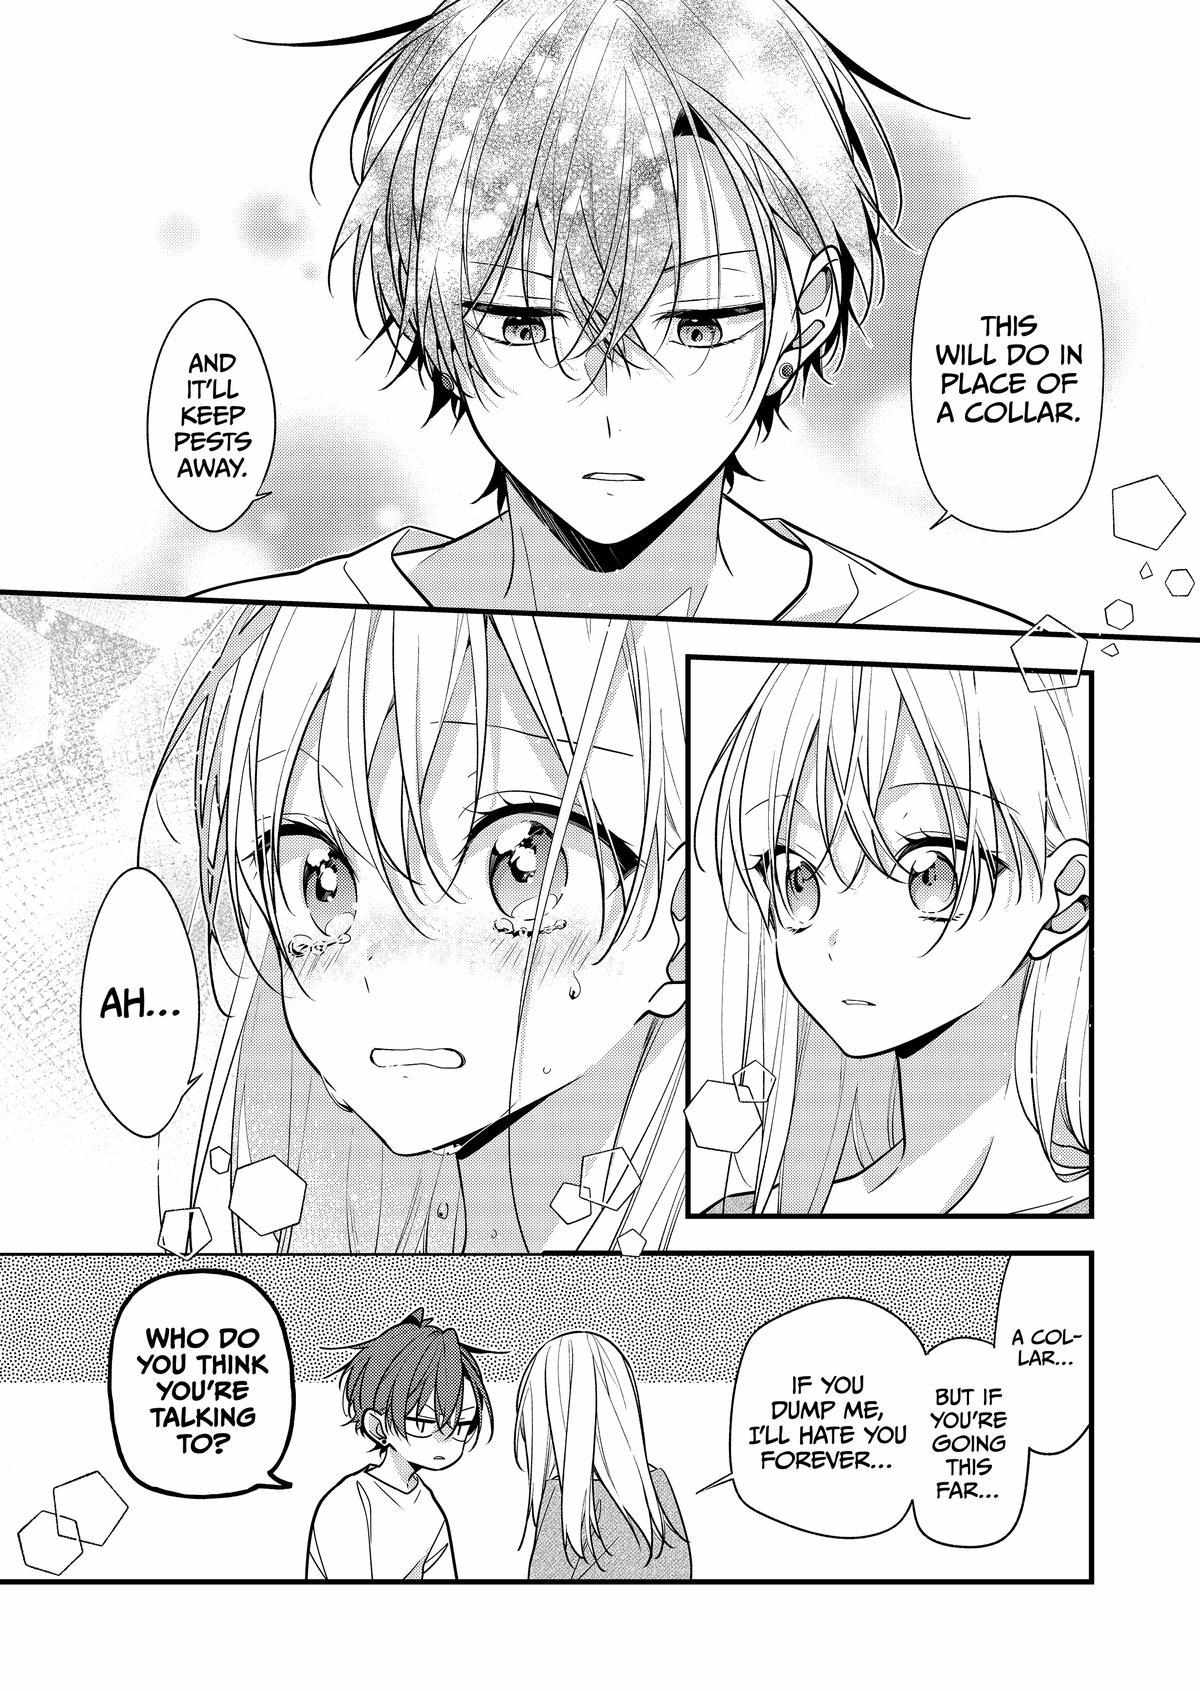 The Story Of A Guy Who Fell In Love With His Friend's Sister - 33 page 4-19e46ee5